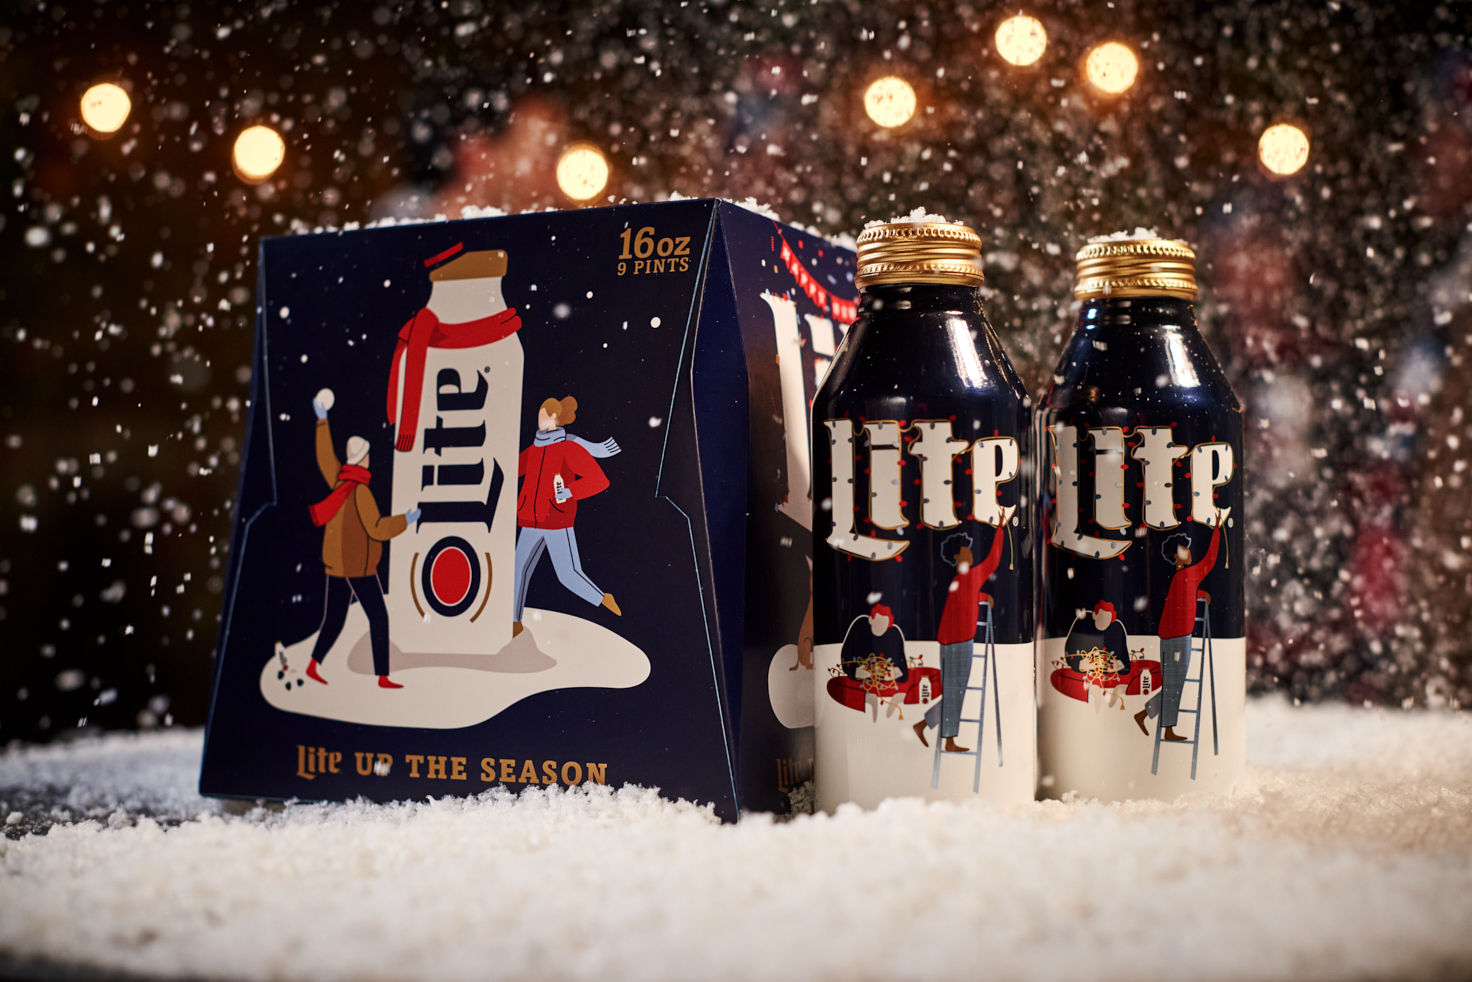 Miller Lite's new holiday swag is now available